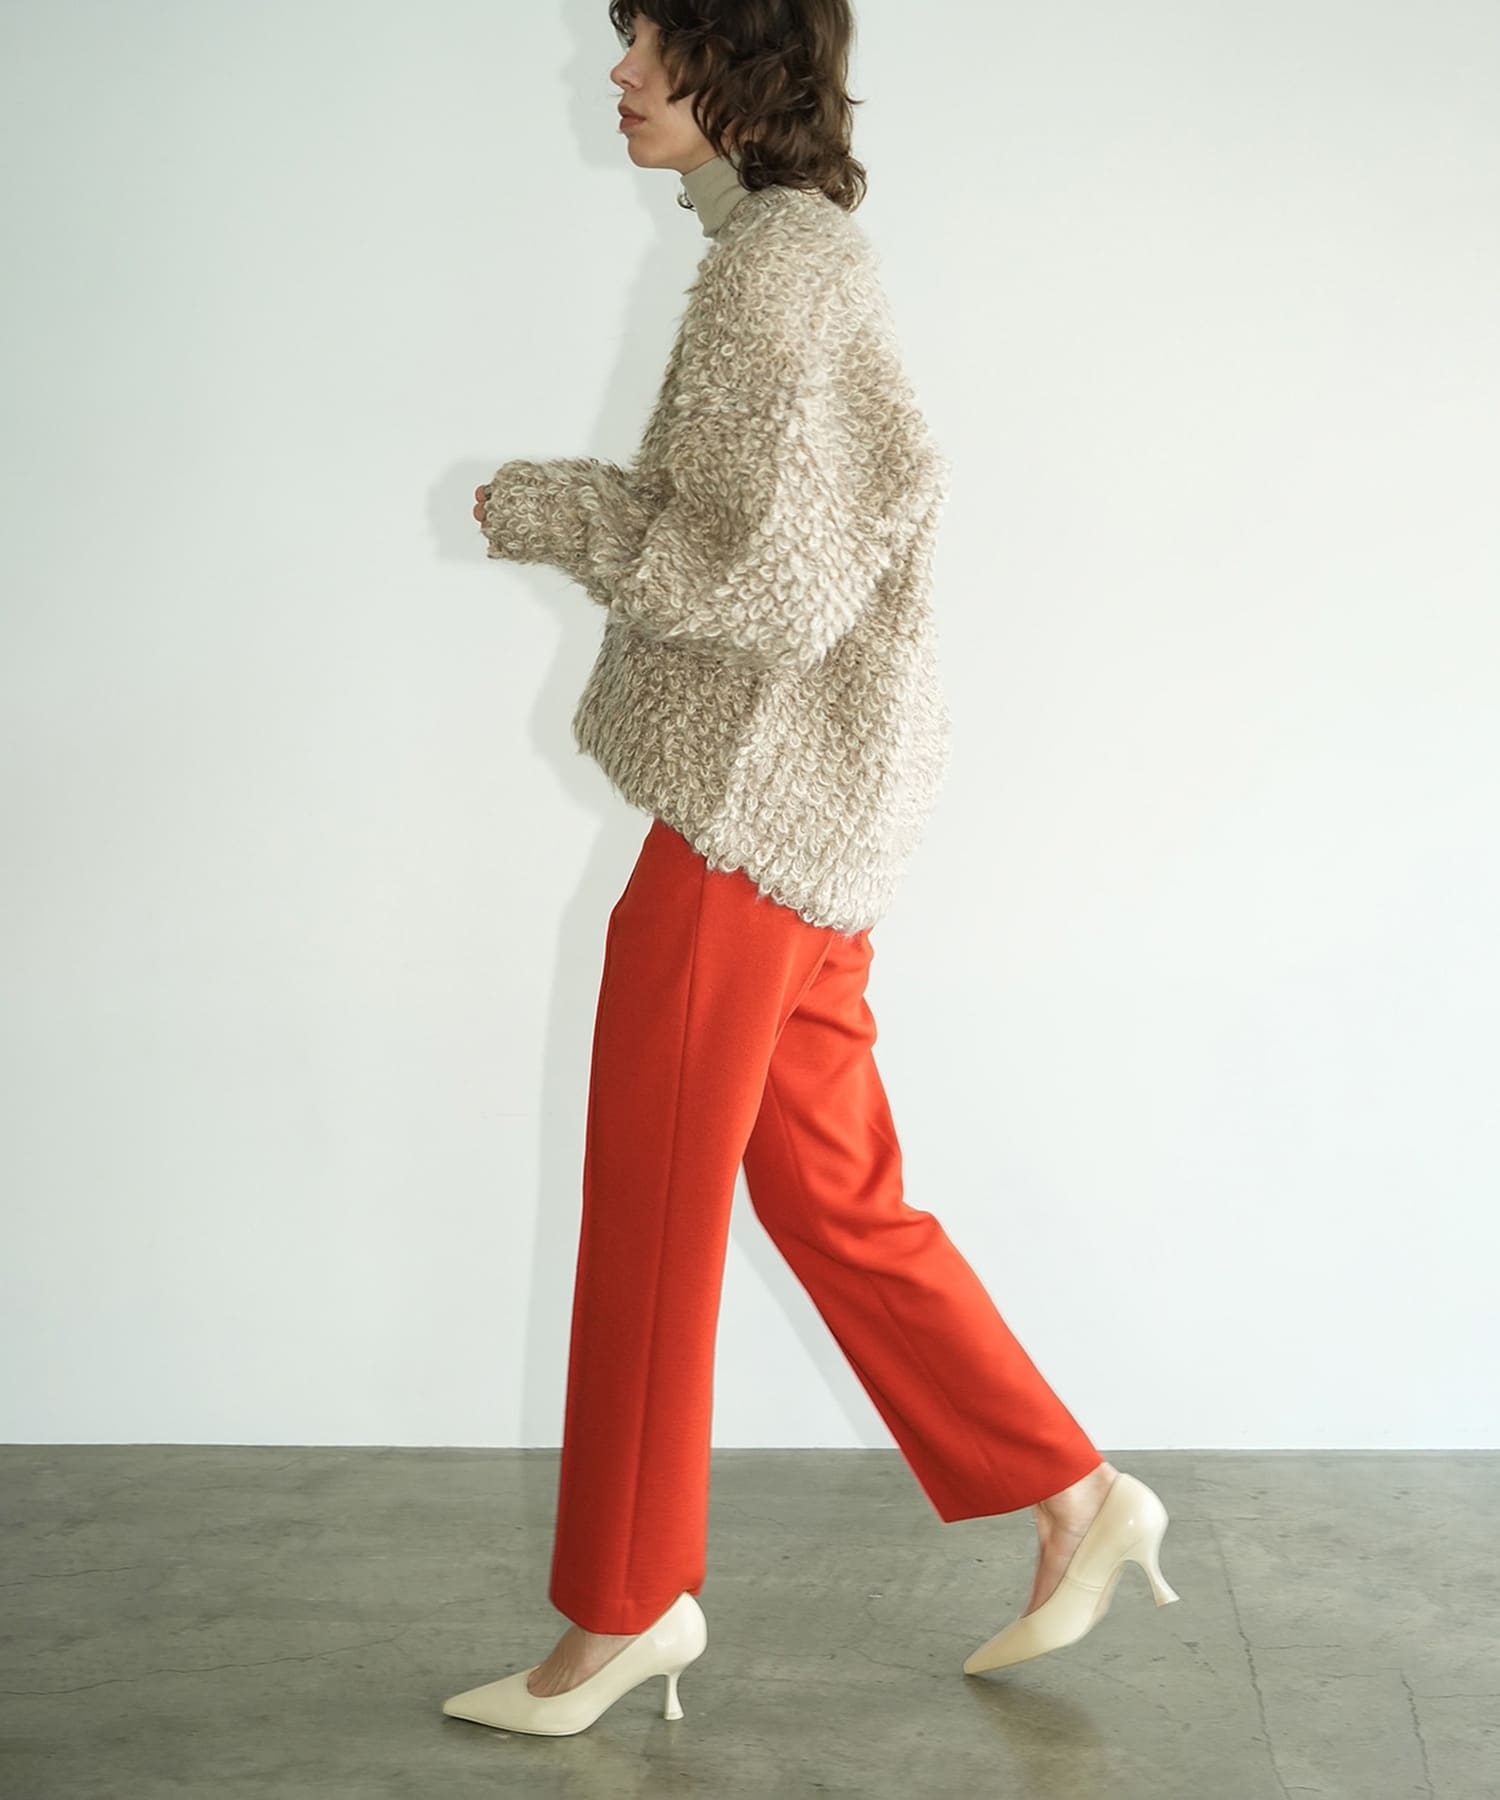 MIX LOOP MOHAIR KNIT TOPS(1 BEIGE): CLANE: WOMENS｜ STUDIOUS